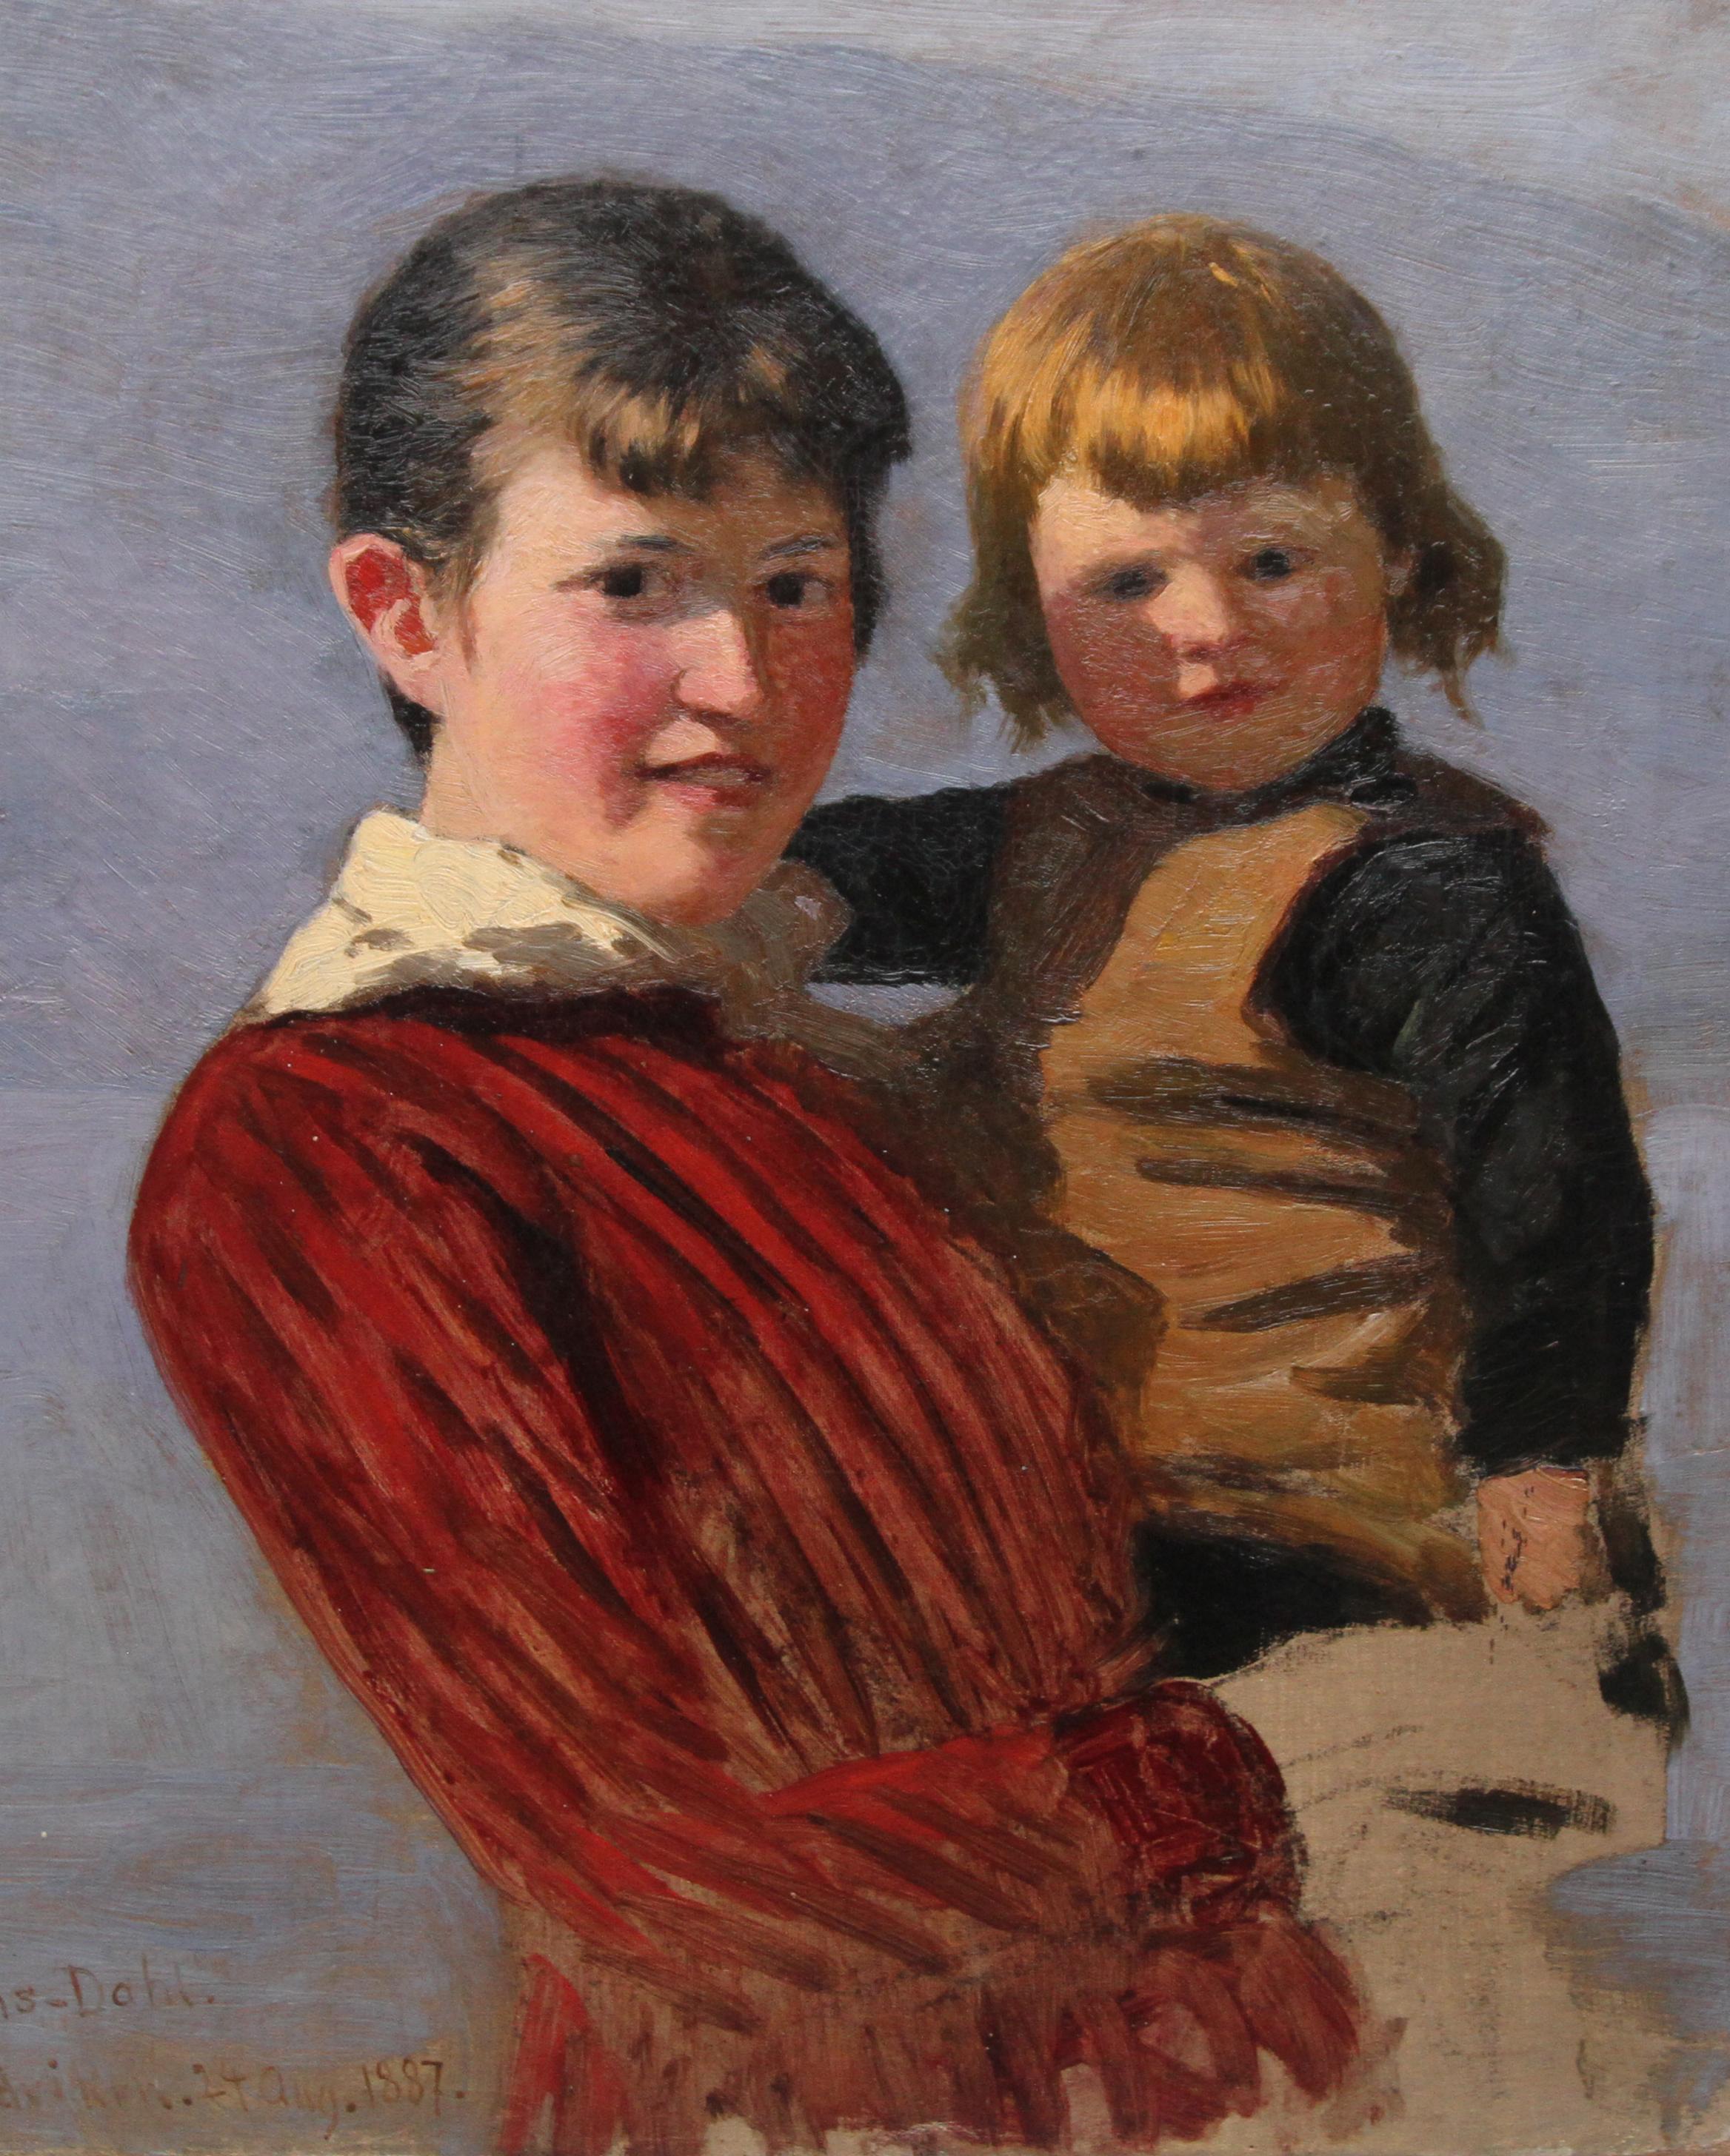 This beautiful oil on canvas portrait is by Norwegian artist Hans Dahl of Hardanger in Norway.  The work depicts an  older sister in a stripped red dress with a child in her arms. The brush work is Norwegian Impressionist and free flowing. The